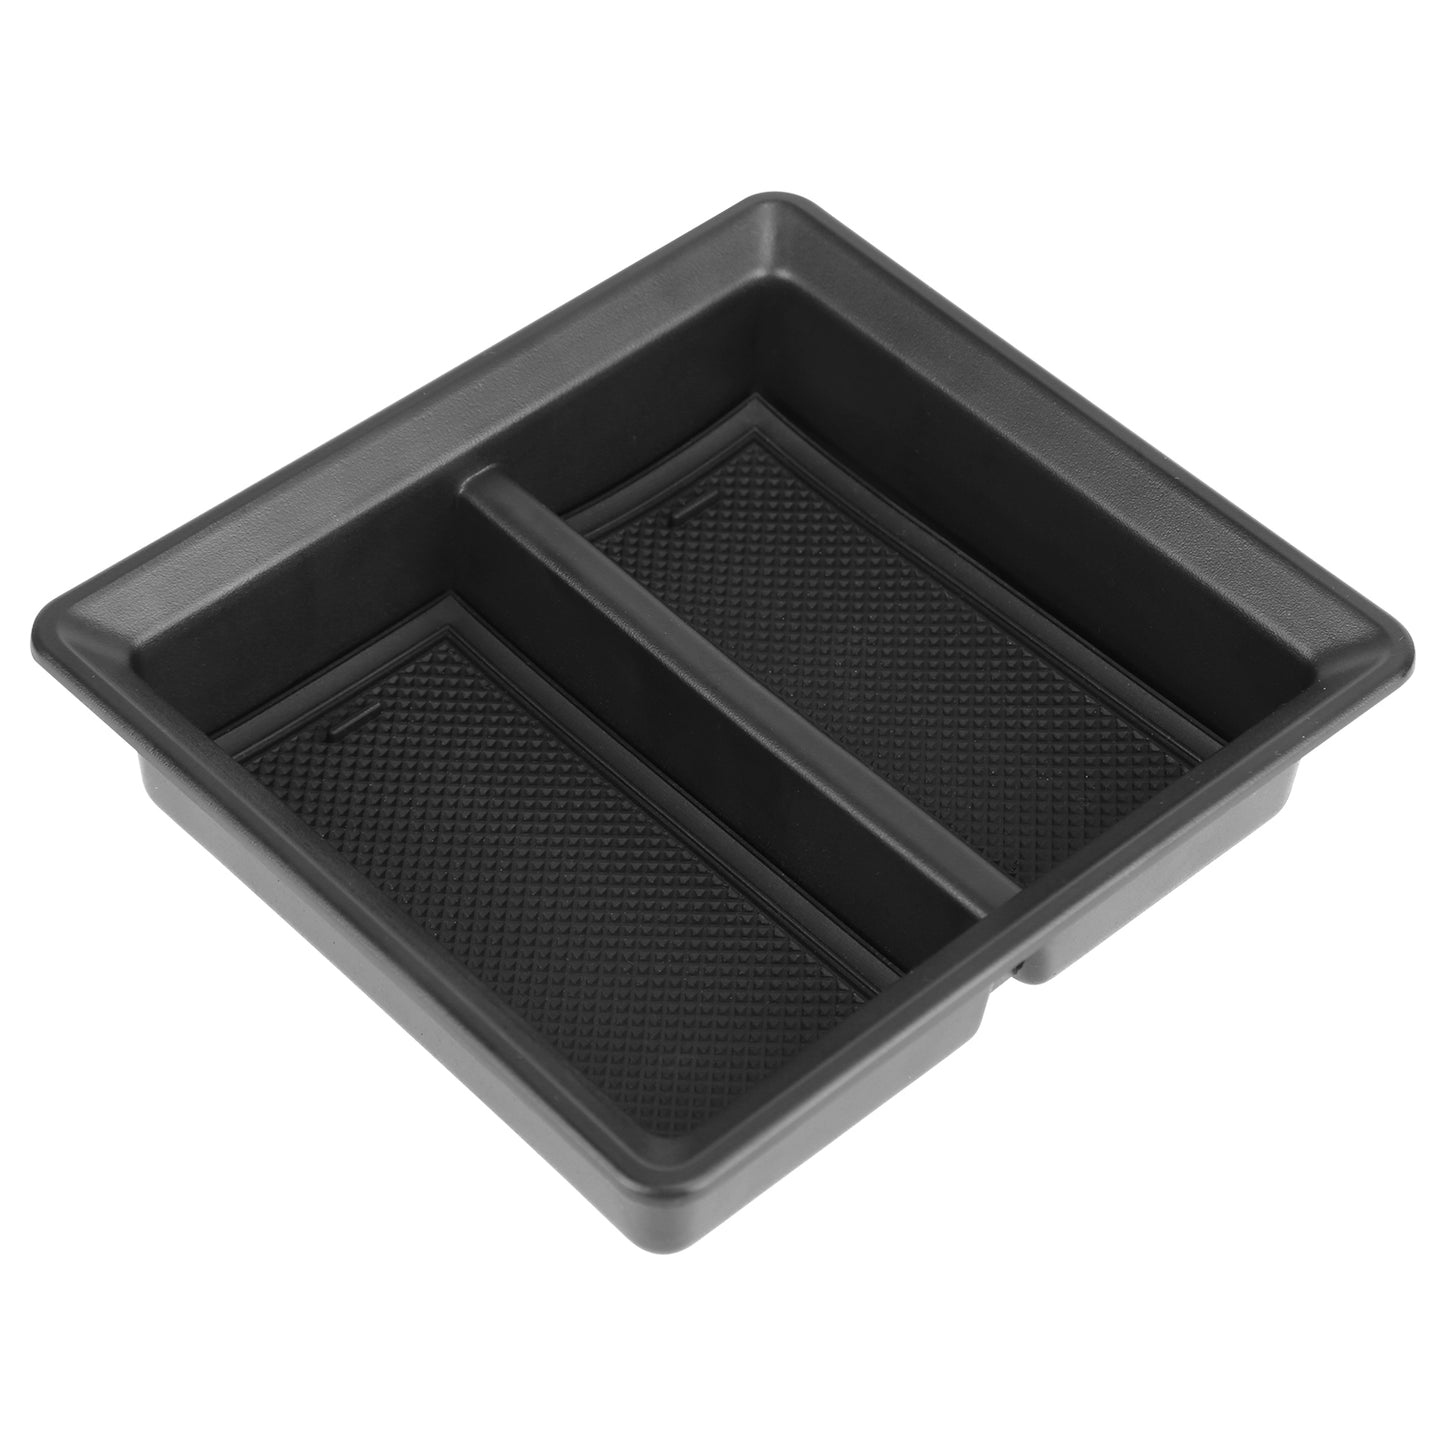 Center Console Organizer Tray Fit For 2021 2022 2023 Tesla Model 3 Model Y Armrest Drawer Storage Box with 2Pcs Silicone Pads - Black -